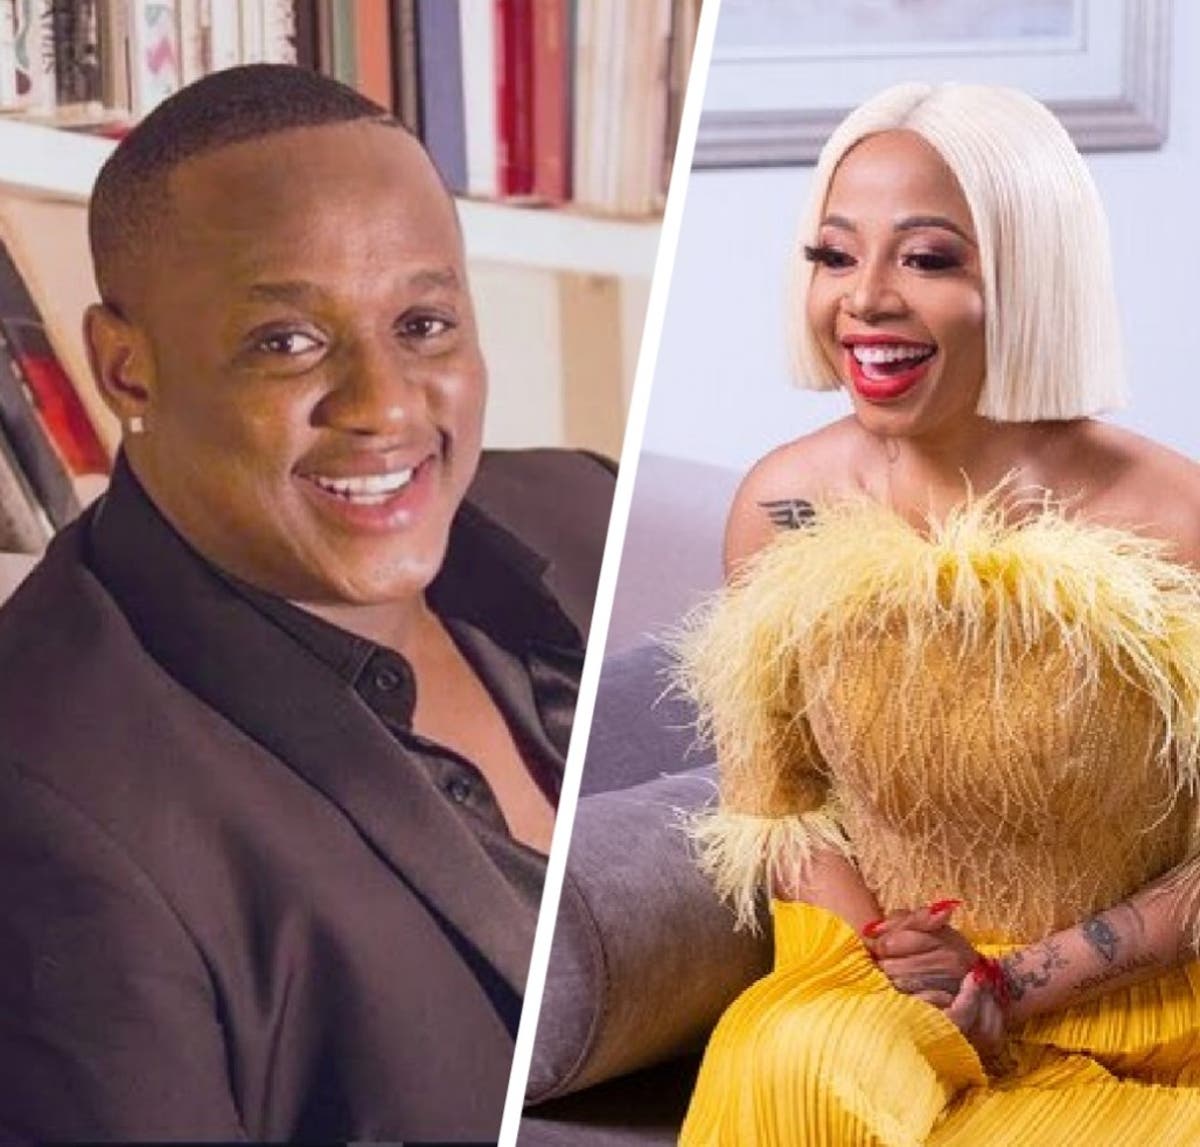 Jub Jub's Son Gets Expelled After Bringing Kelly's Weed To School